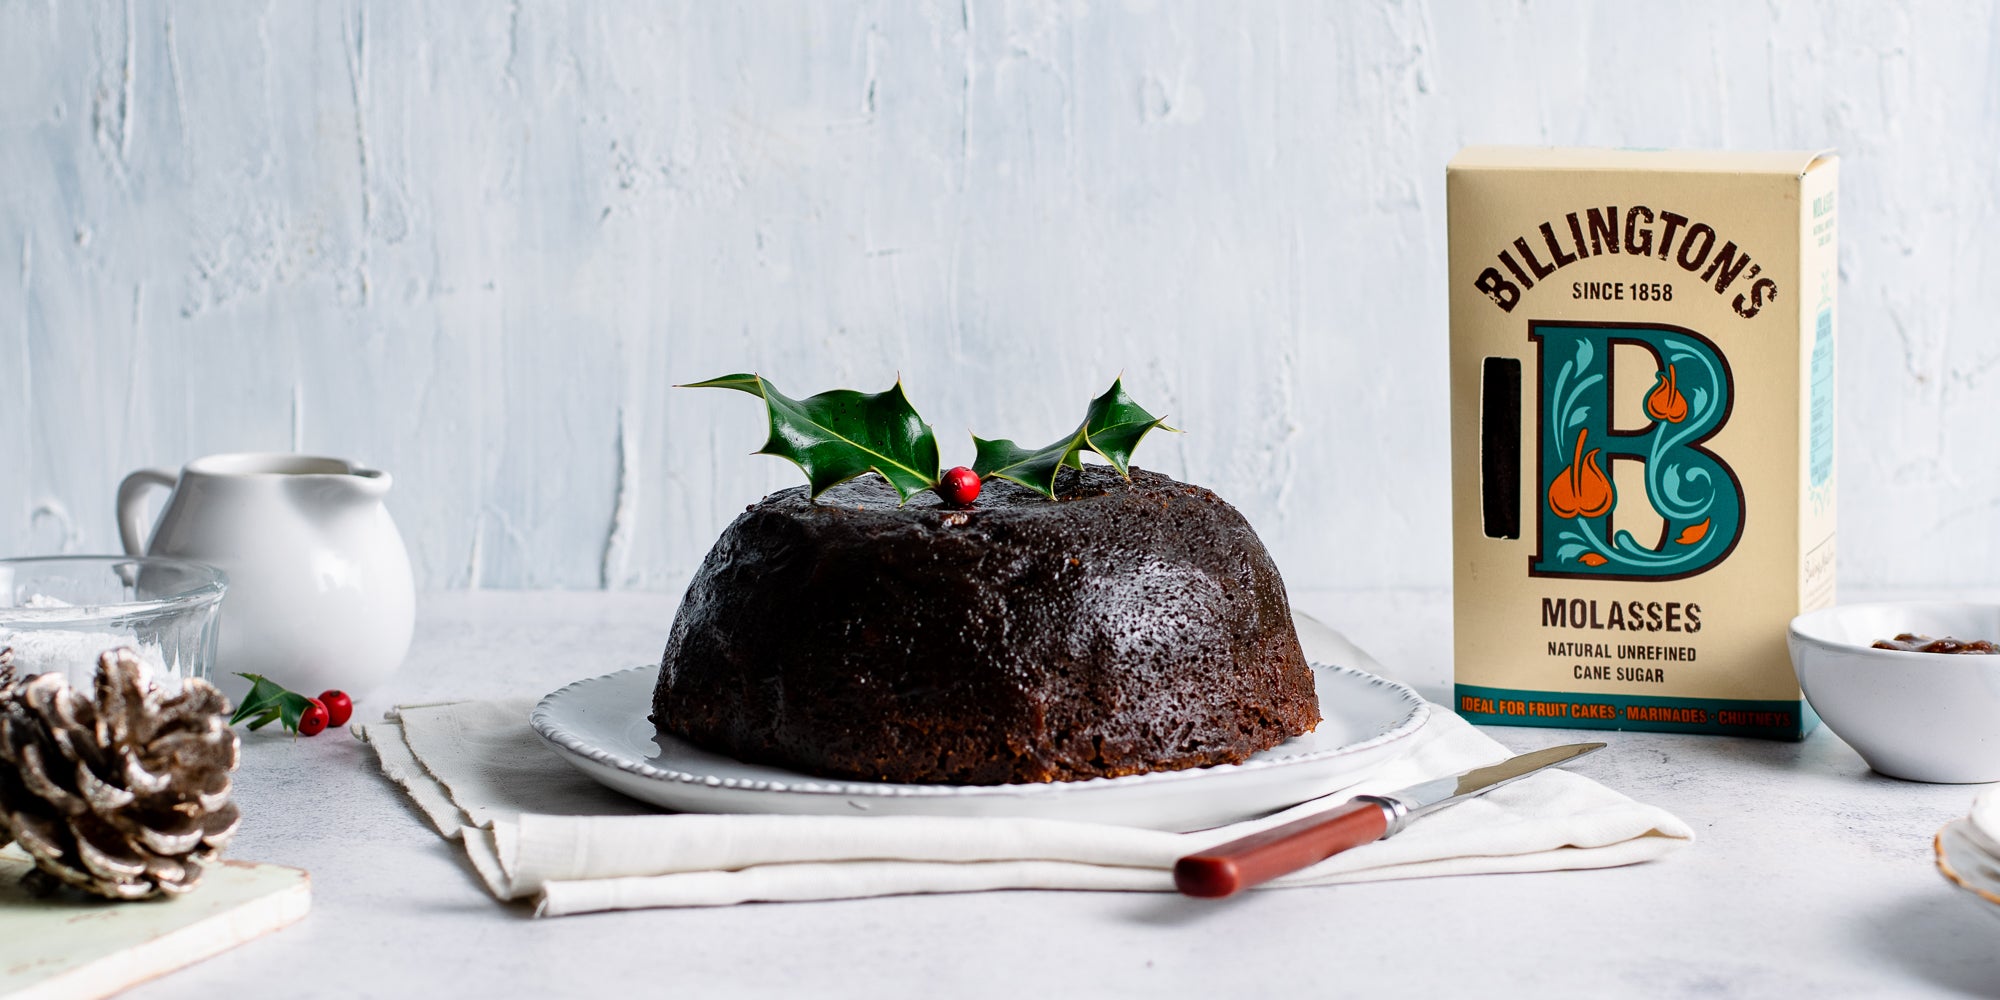 Last Minute Christmas Pudding next to a box of Billington's Molasses and a jug of cream or brandy butter to serve